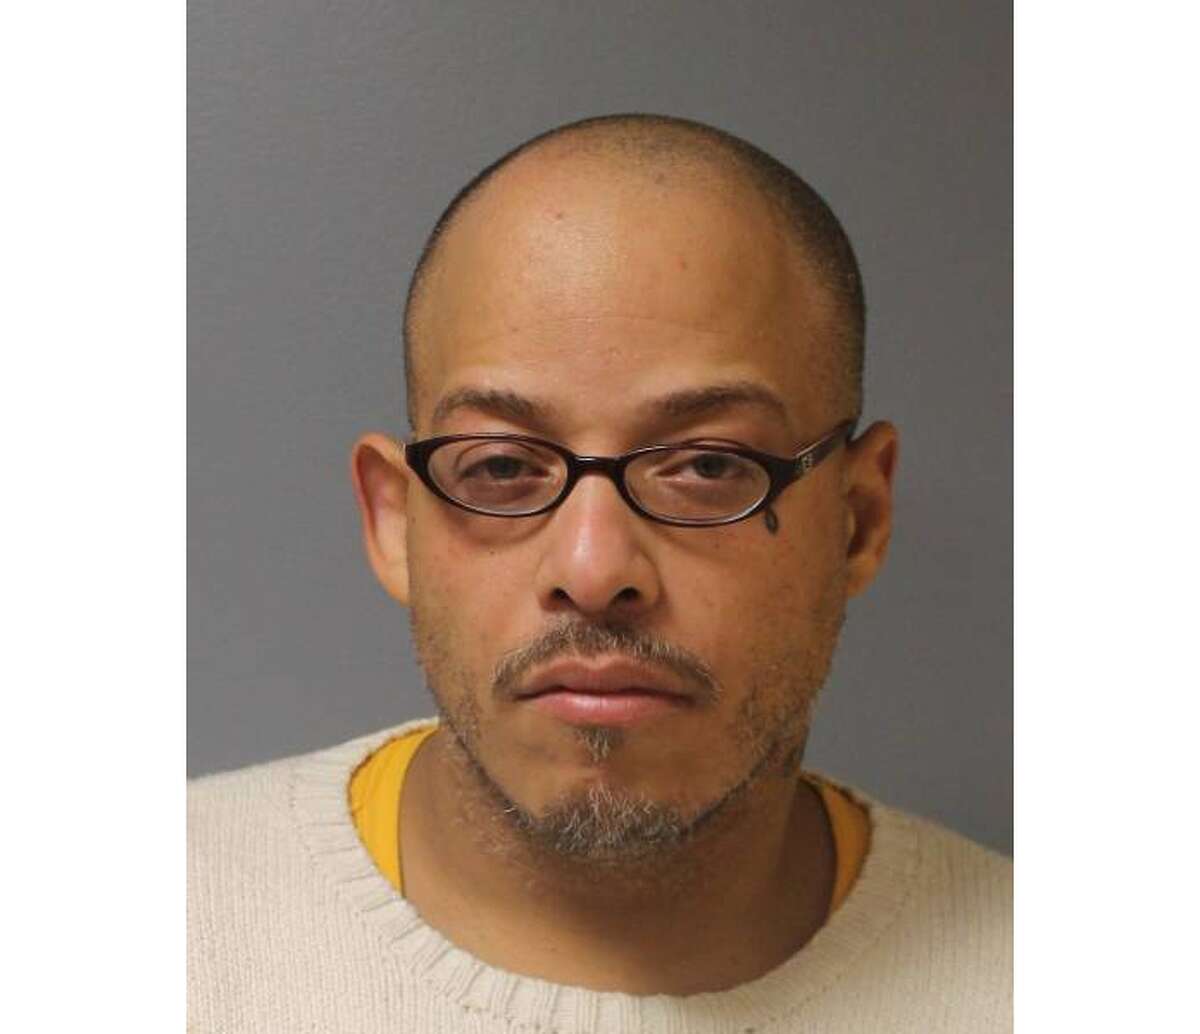 Jerson Vargas is accused of attacking a Colonie police officer on a bus stopped at the Central Avenue stop near Colonie Center on Tuesday, Feb. 11, 2020.Police said this photo was provided by another agency.